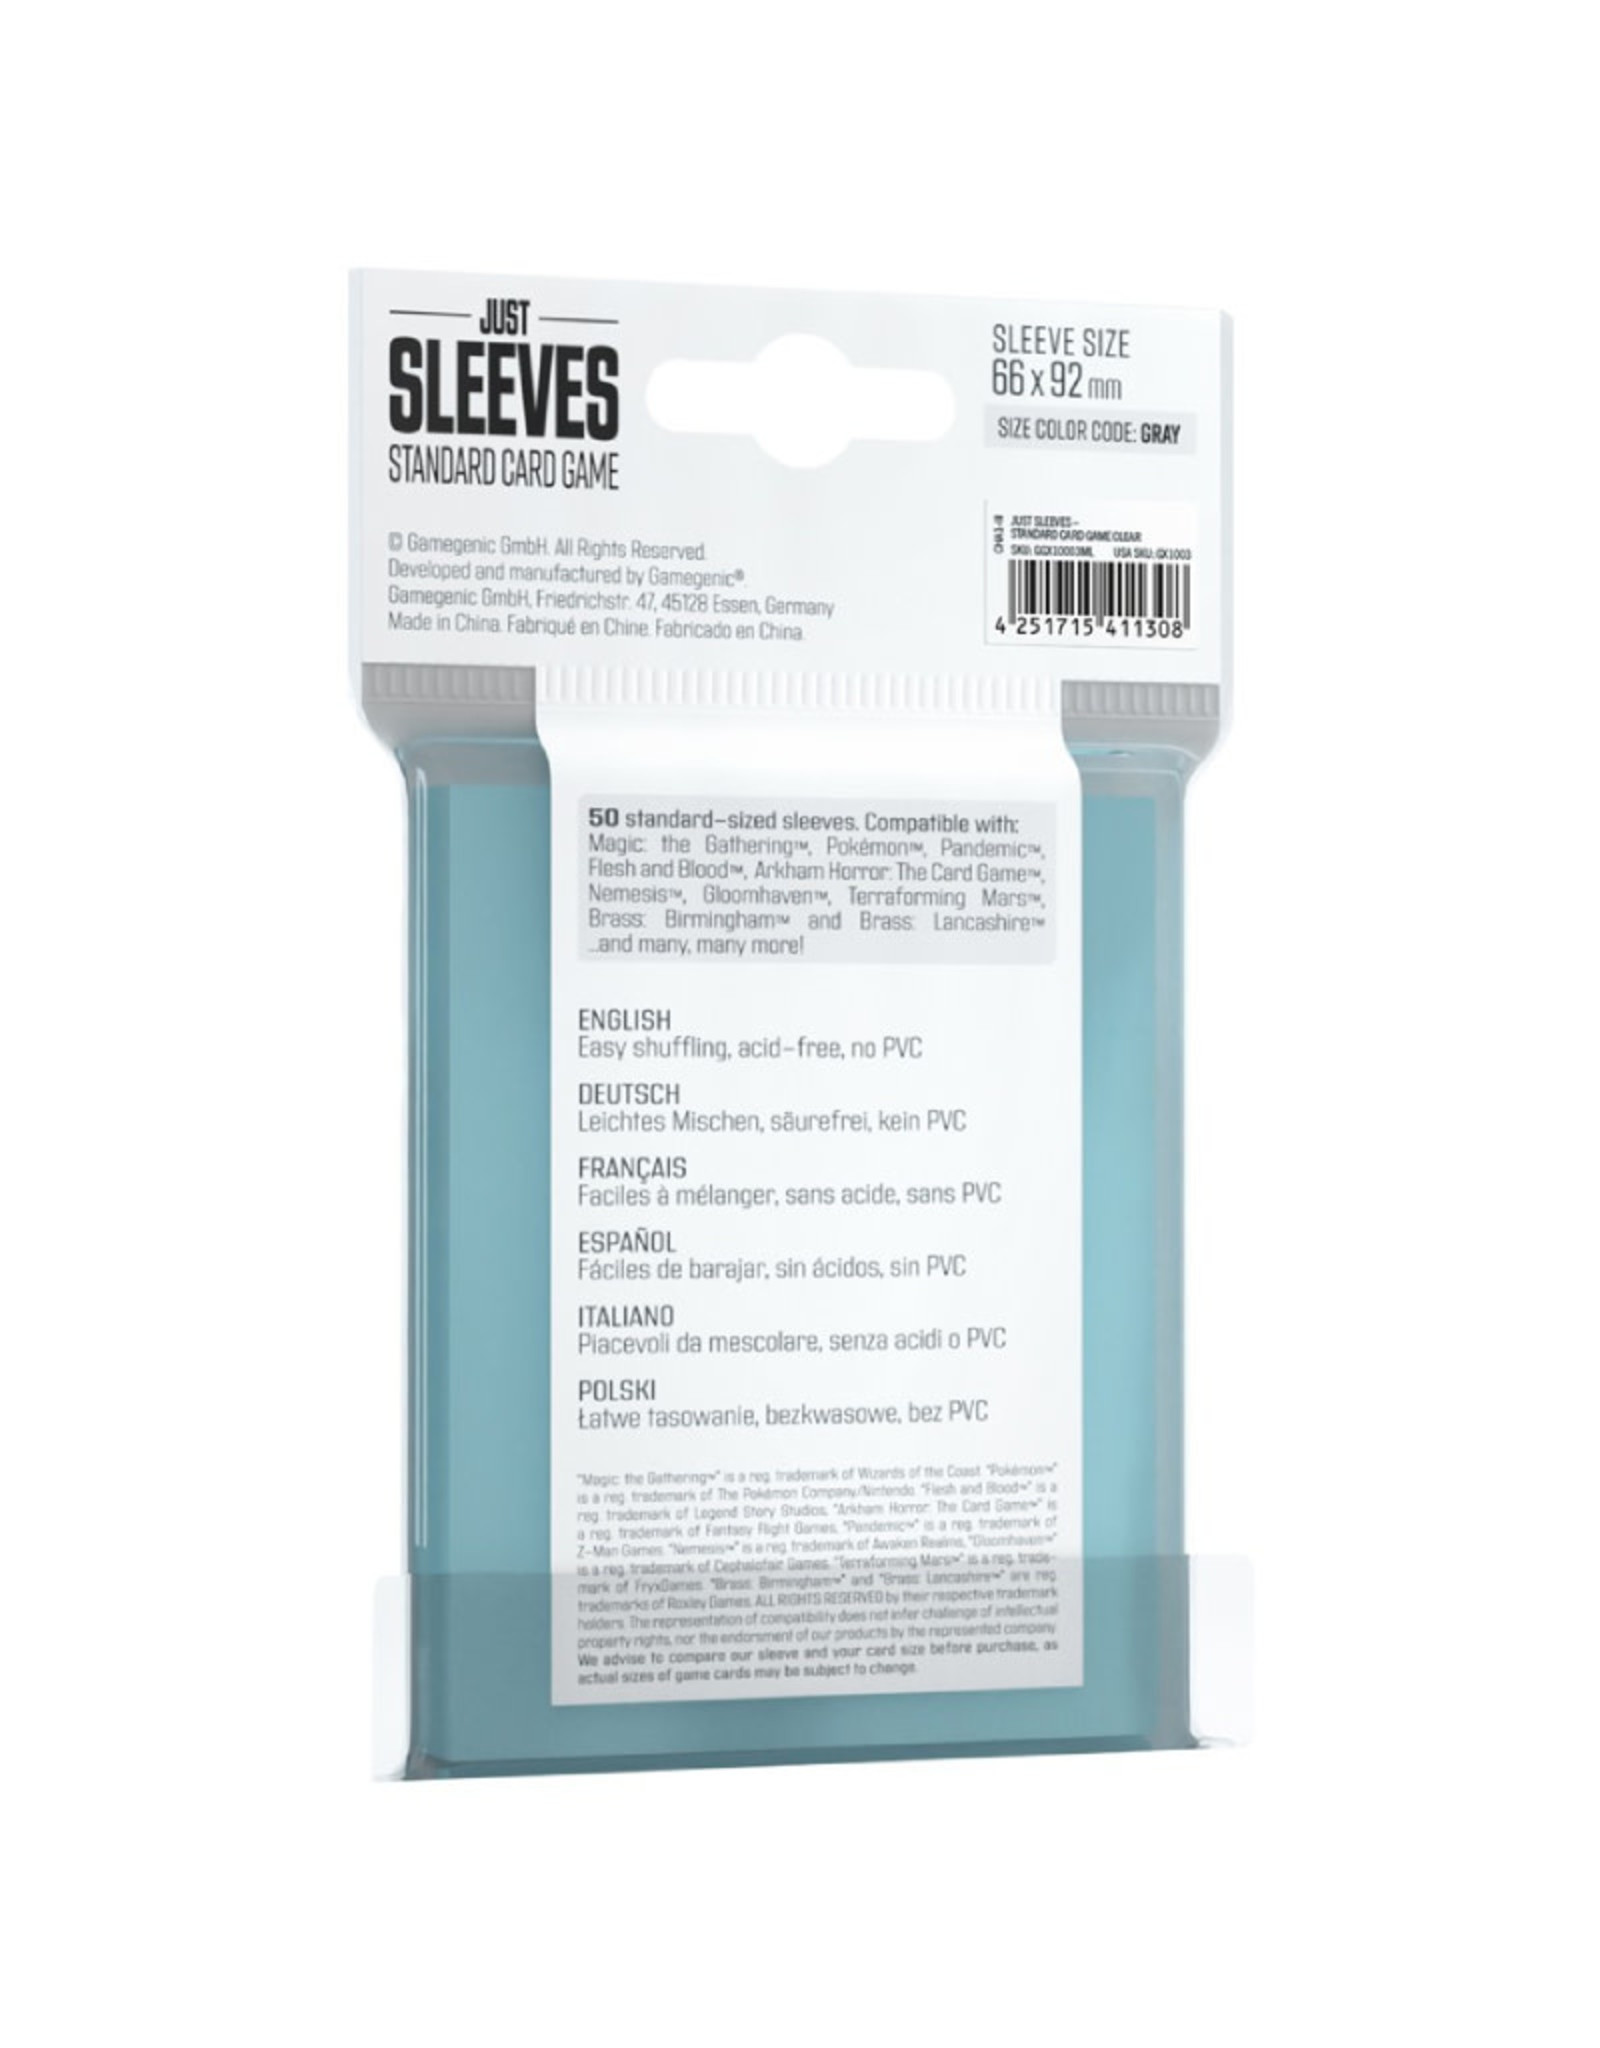 Just Sleeves: Standard Card Game (50) Clear